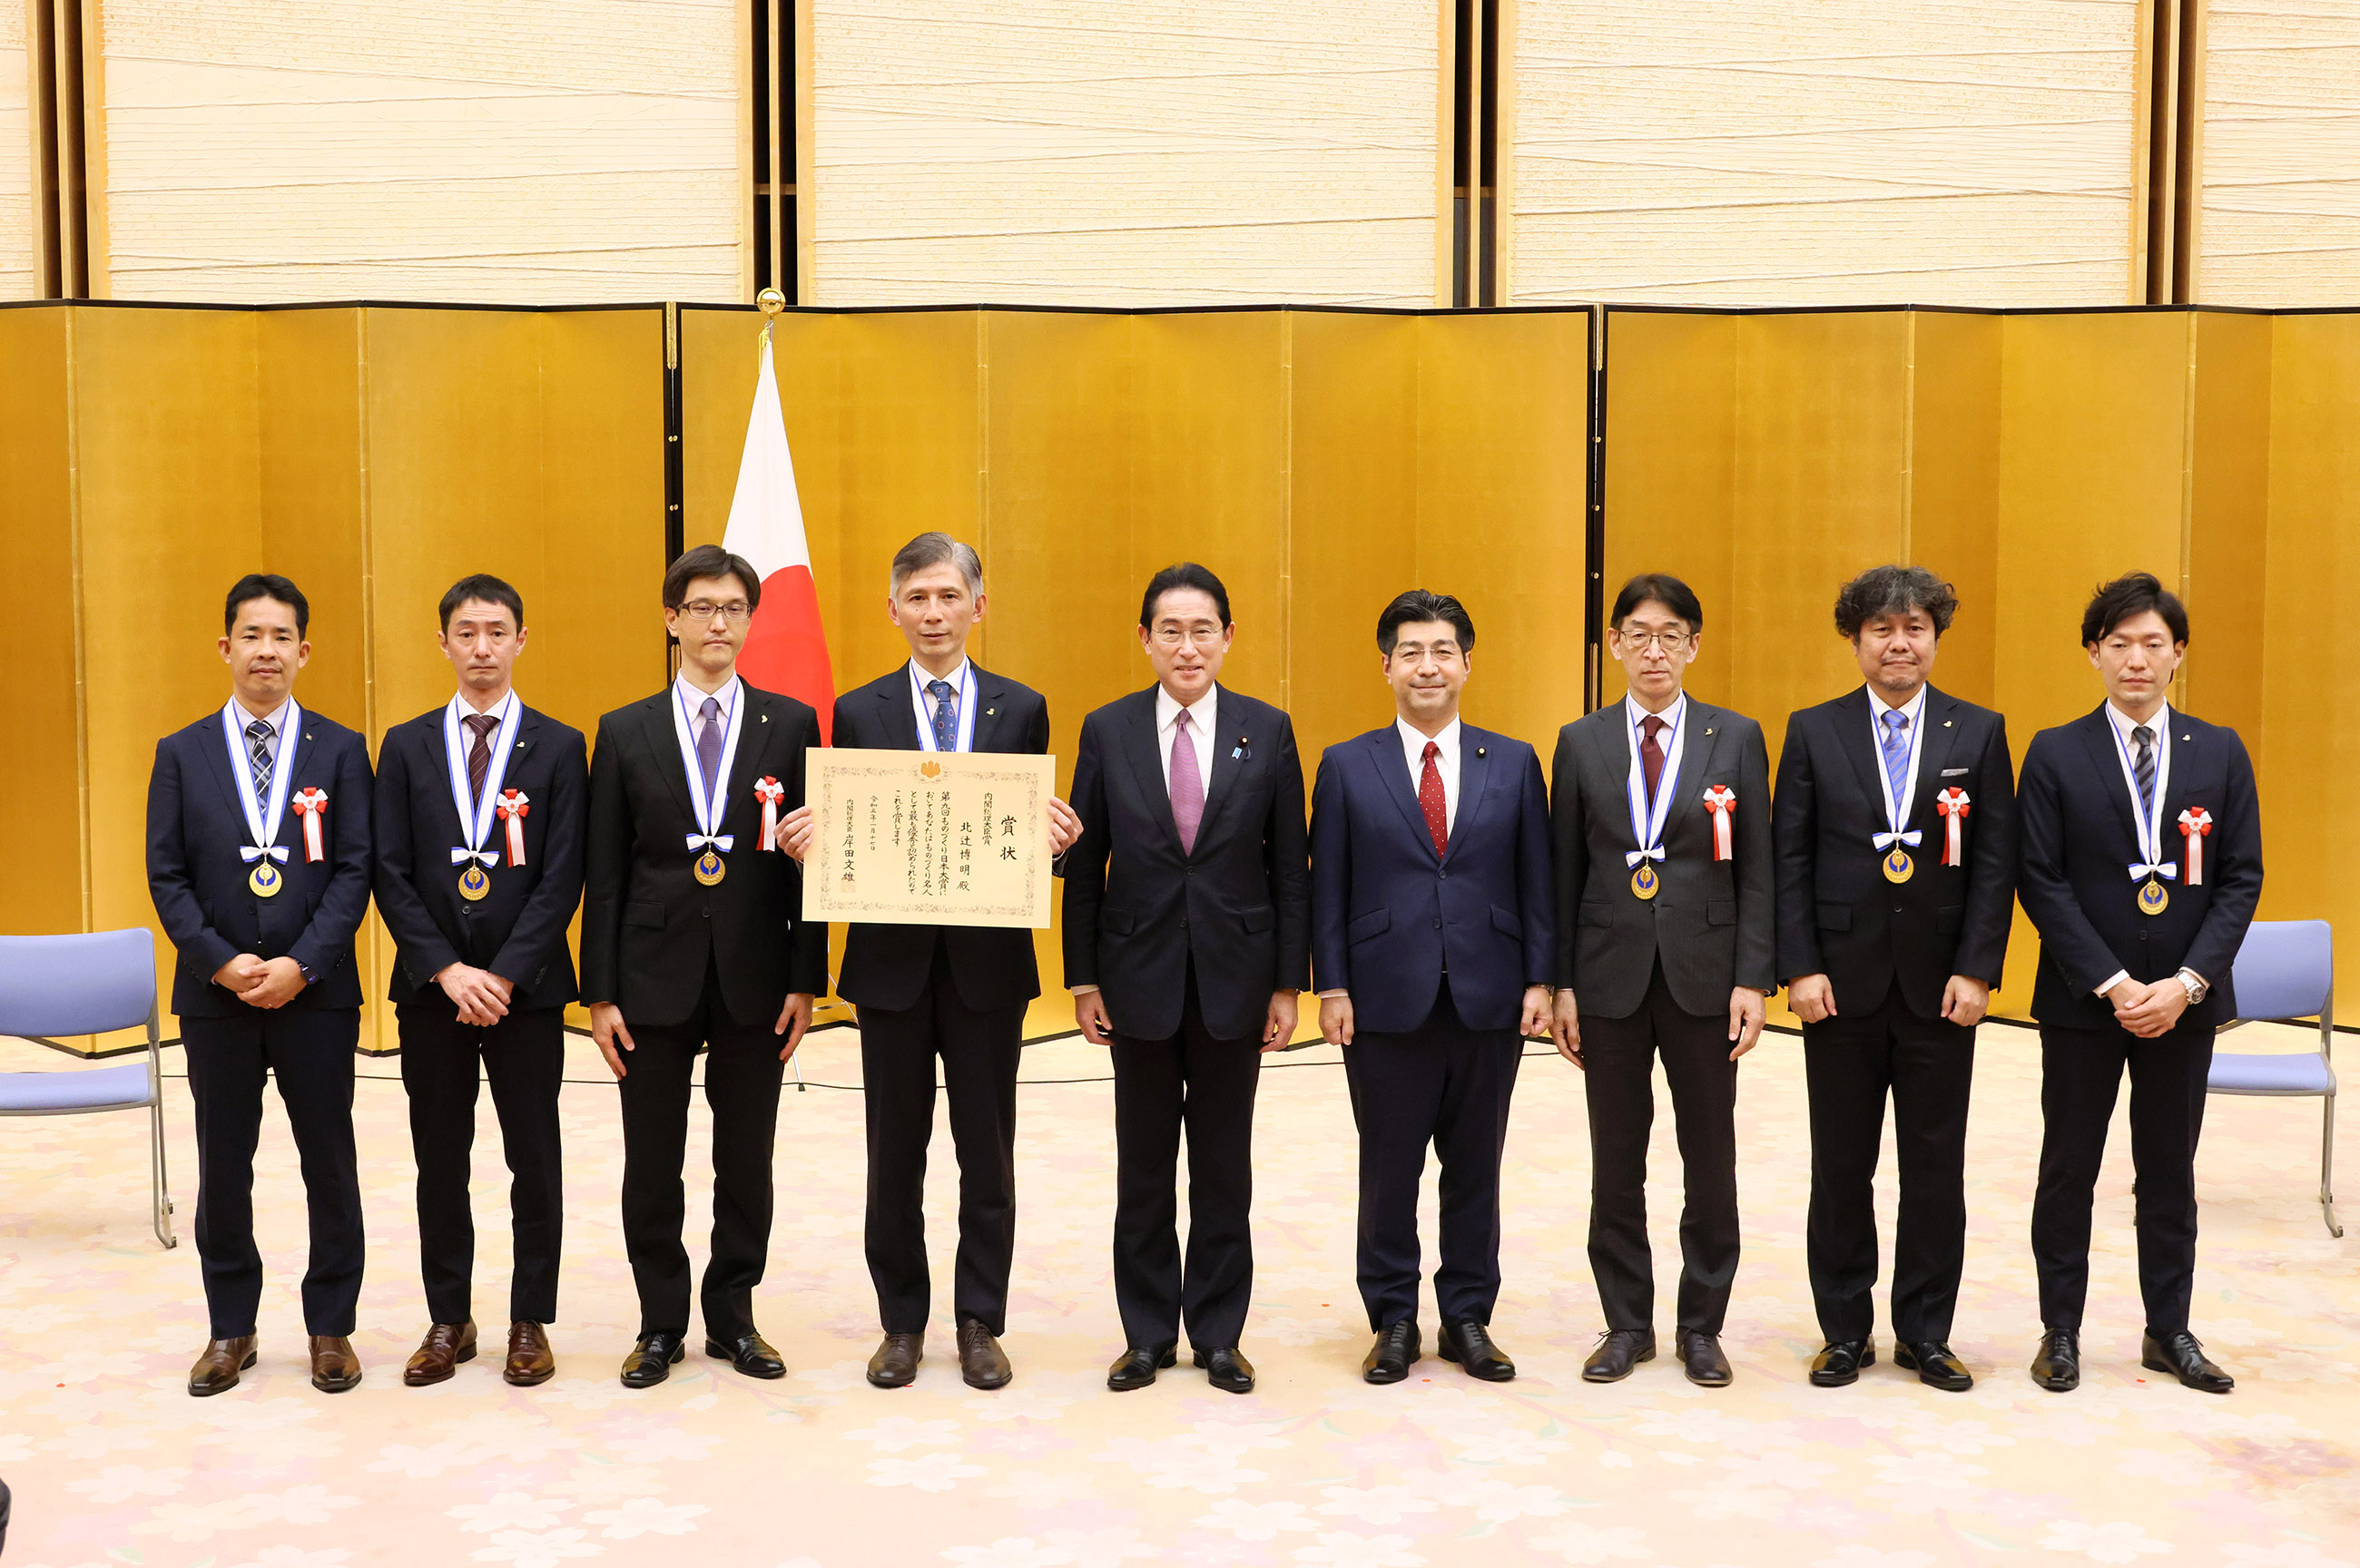 Commemorative photo session with award winners (2)